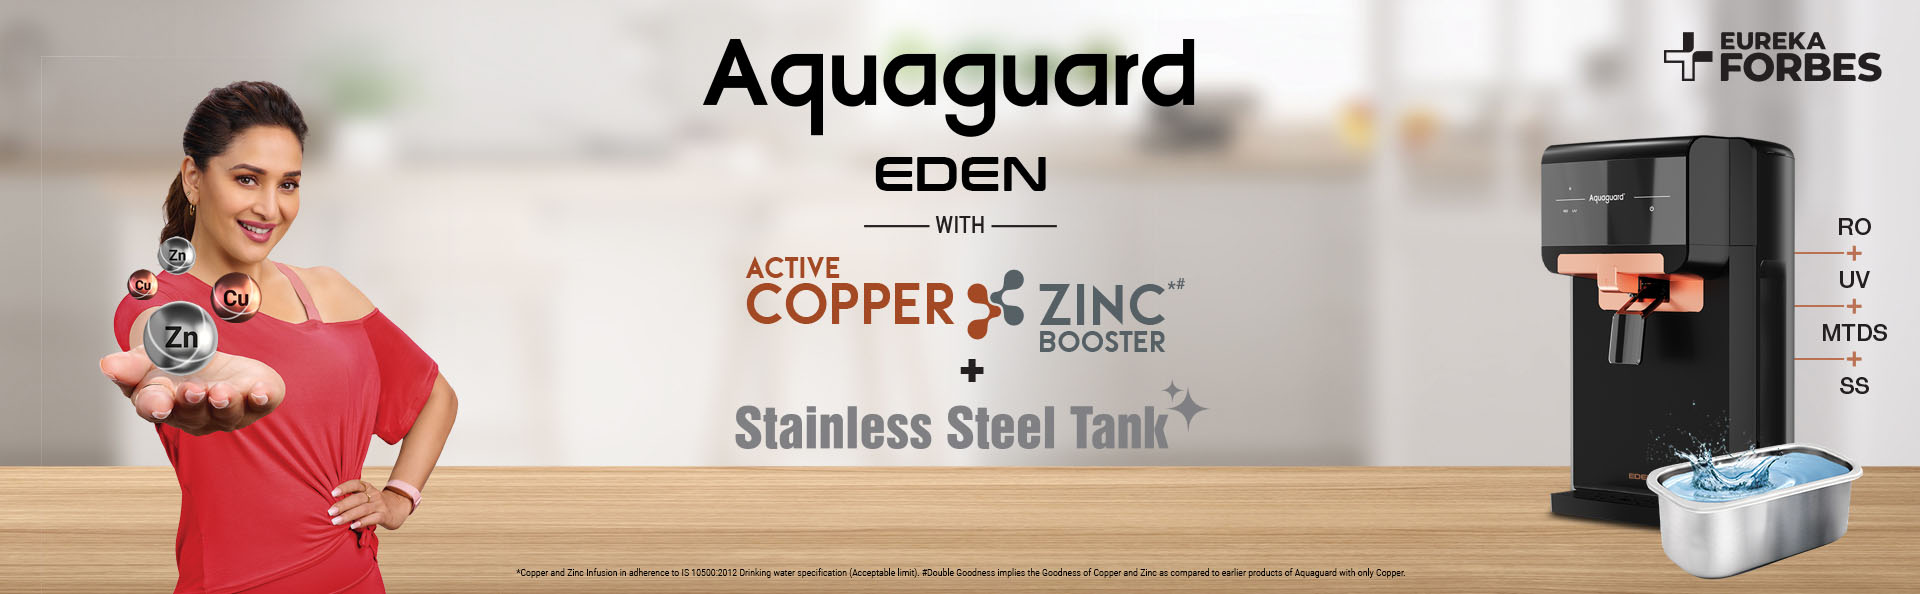 AQUAGUARD WITH ACTIVE COPPER ZINC BOOSTER + STAINLESS STEEL TANK